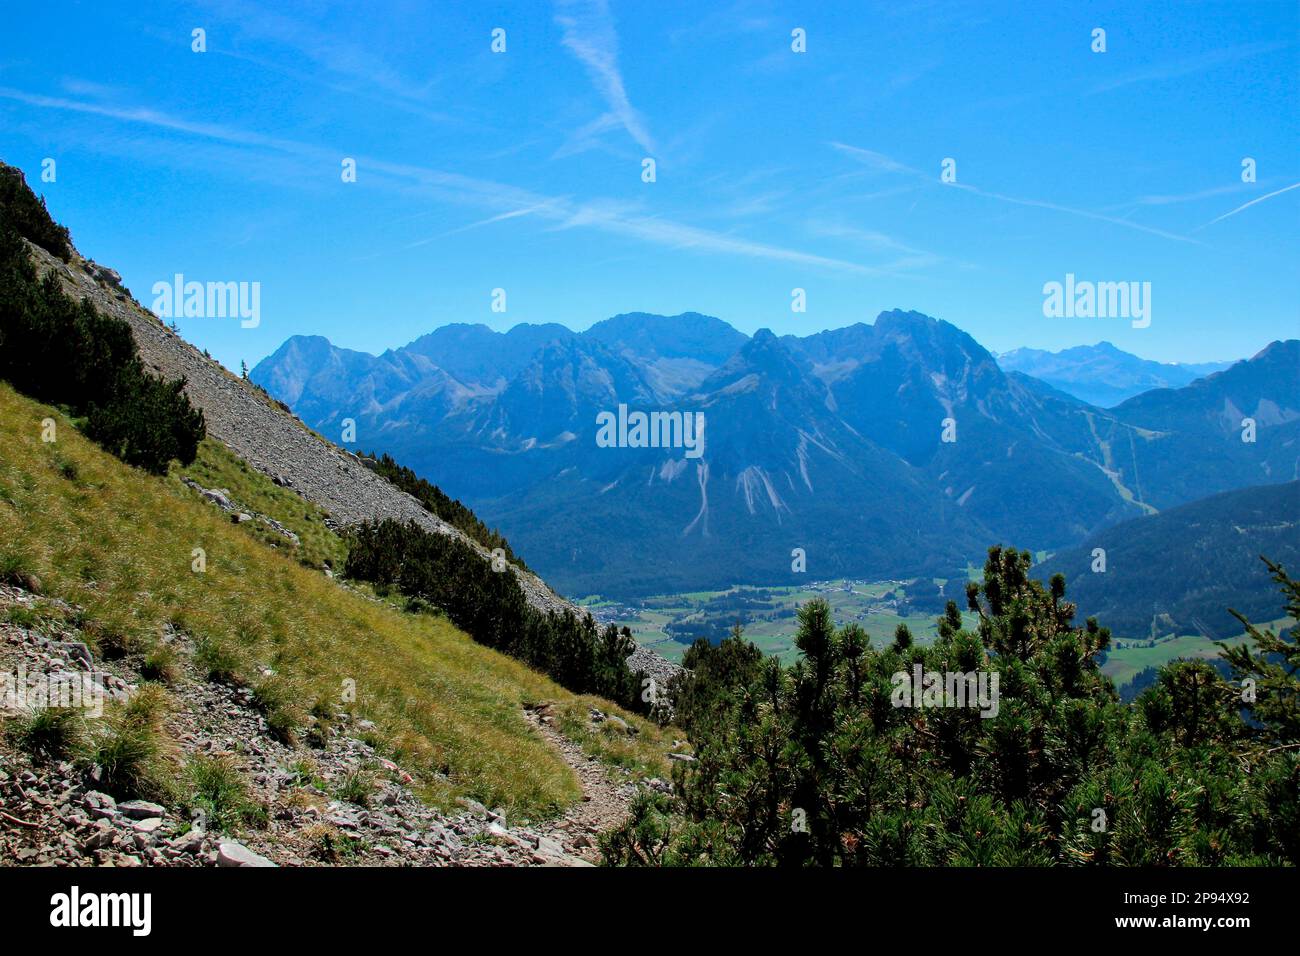 View during the descent from the summit of Daniel (2340m), highest peak of the Ammergau Alps, to the Mieminger mountain range with the prominent peak of Sonnenspitze (2417m), Lermoos, Zugspitzarena, Tyrol, Austria Stock Photo